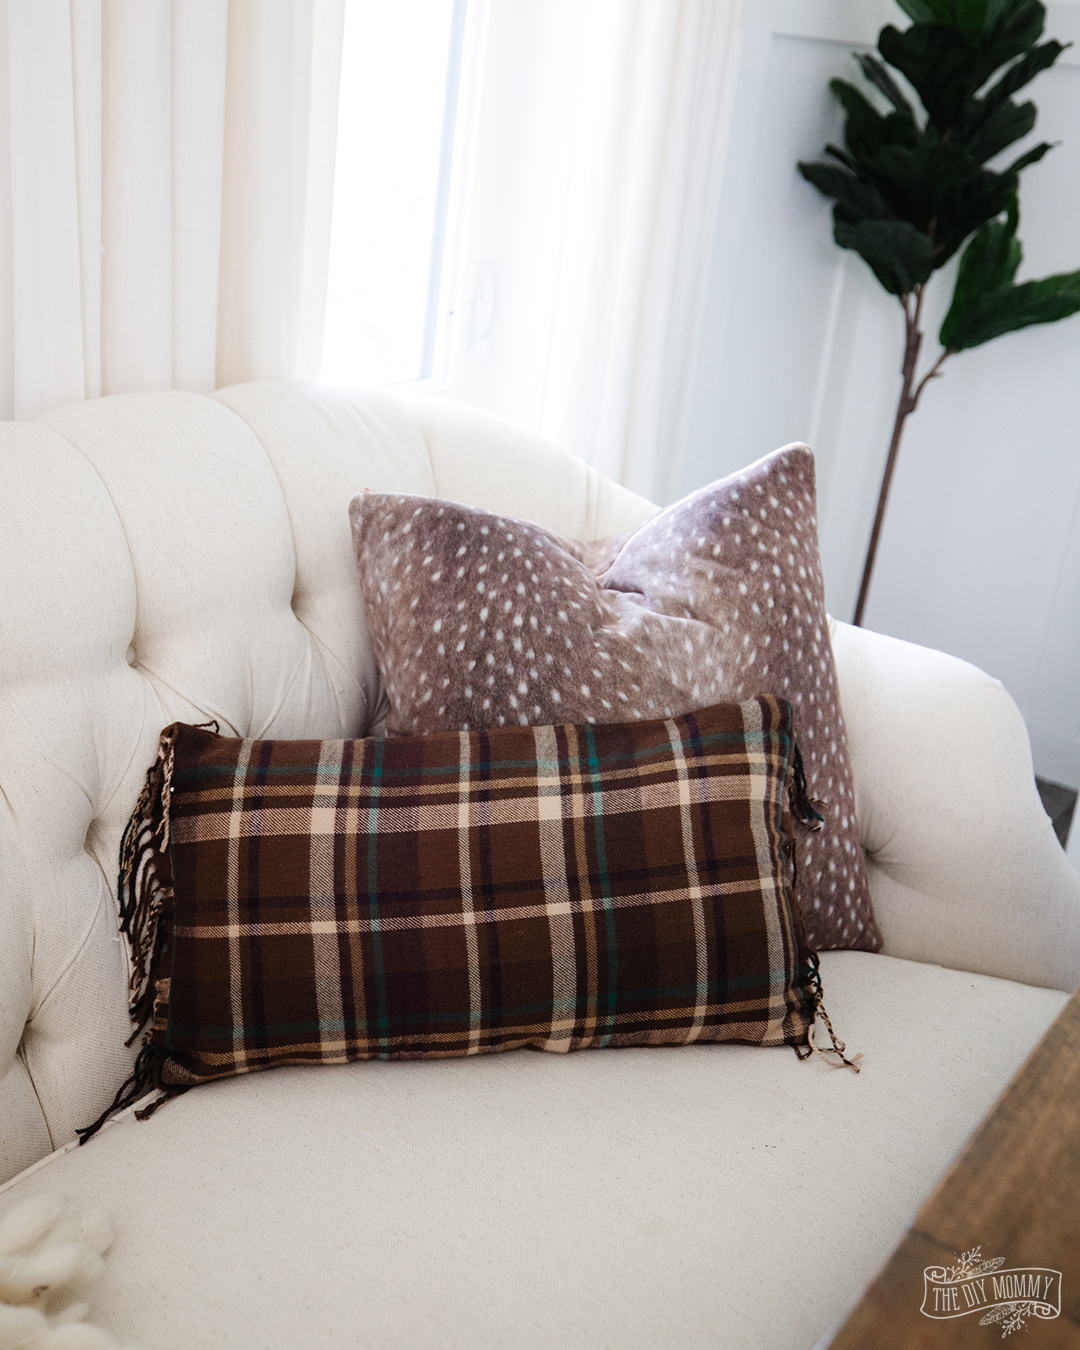 How to make a Fall pillow from a plaid dollar store scarf